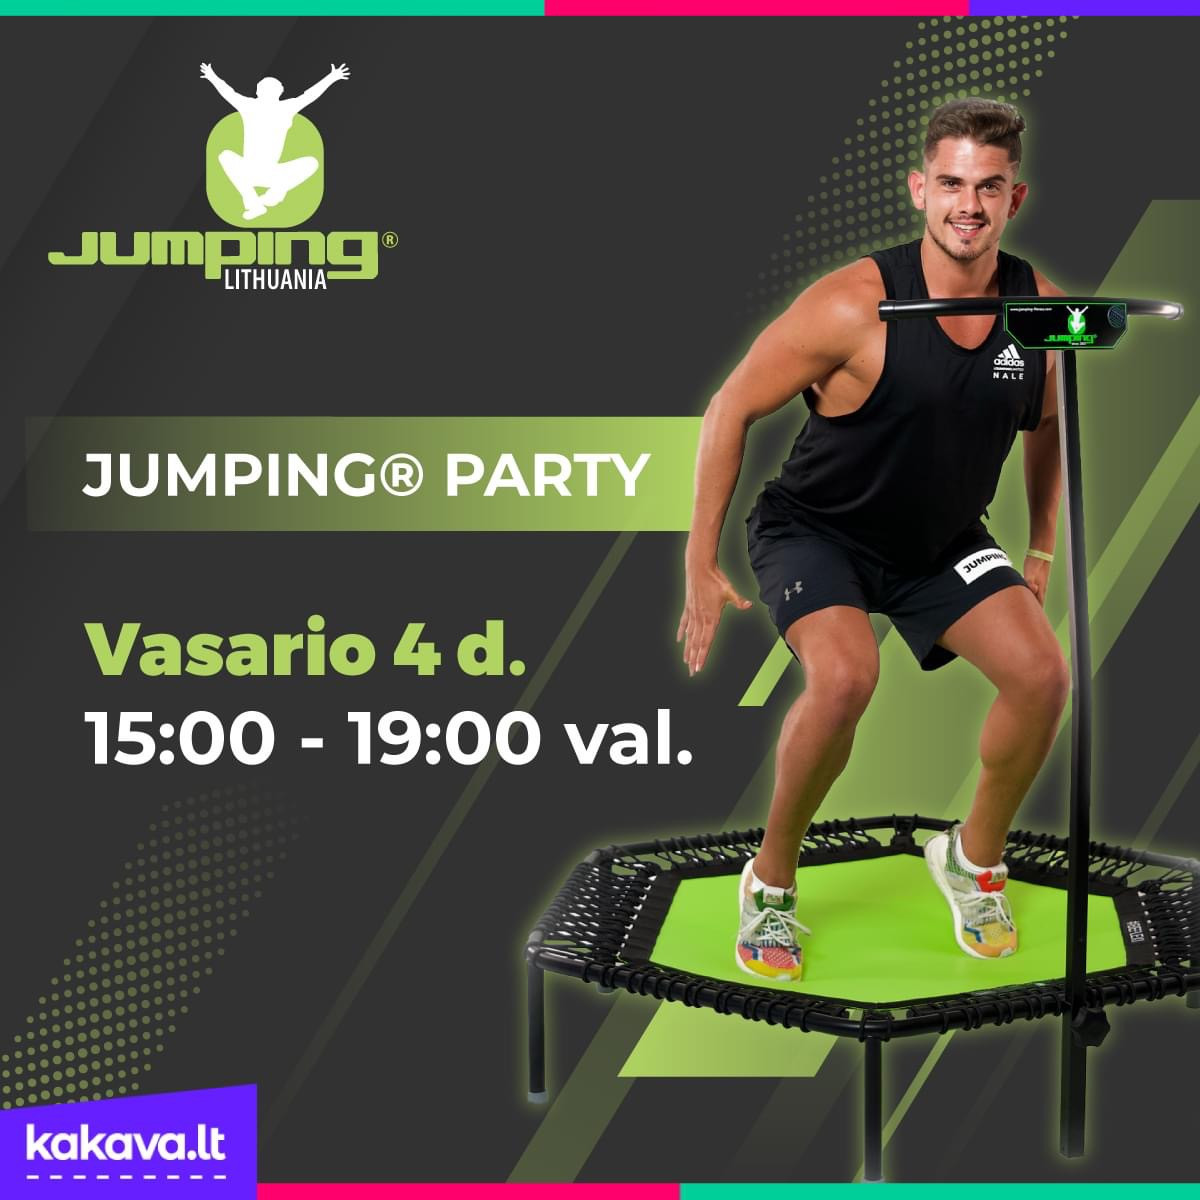 JUMPING®️ PARTY